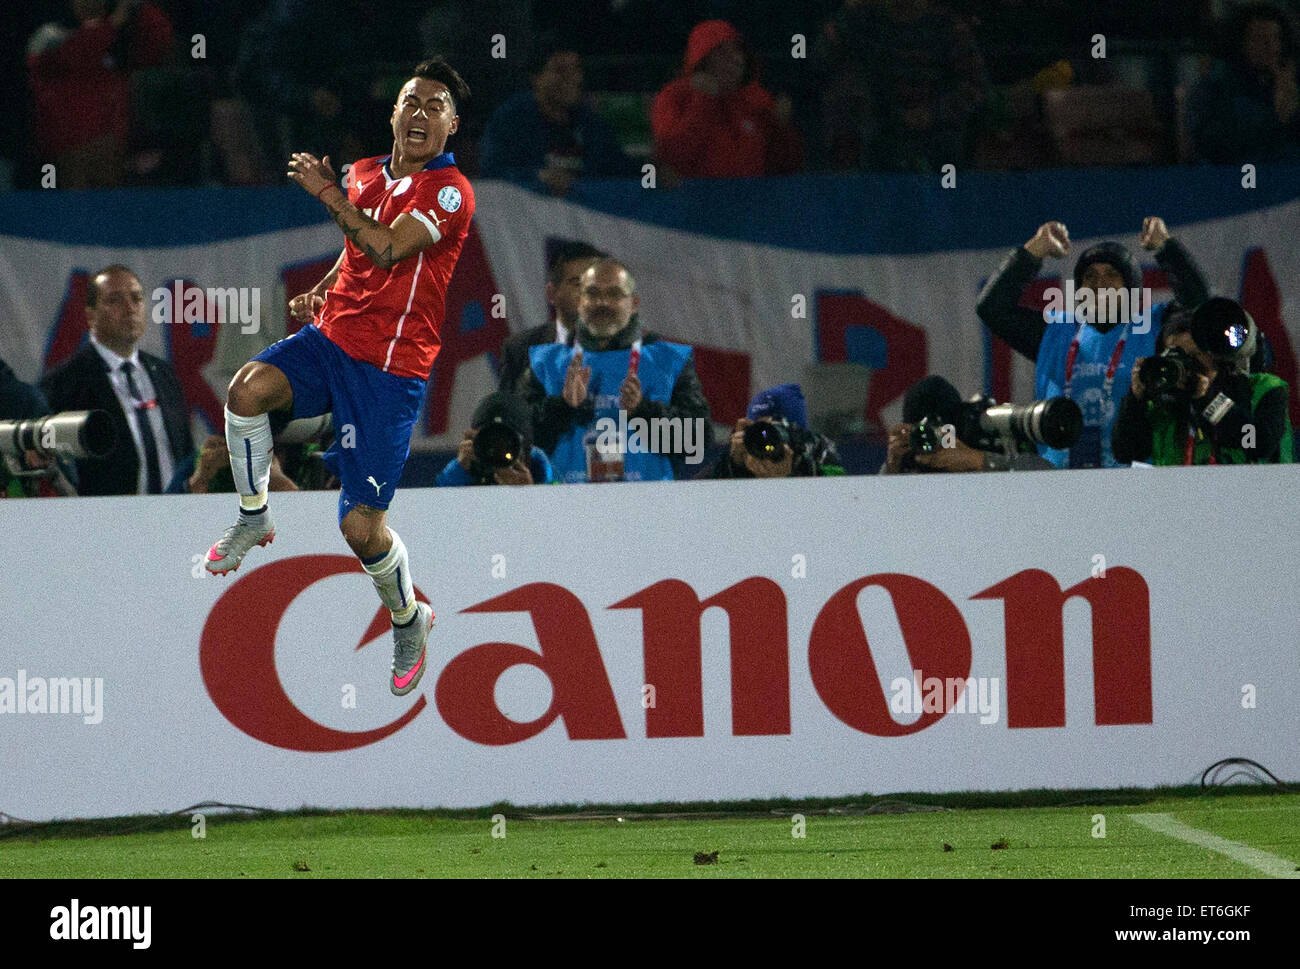 Santiago, Chile. 11th June, 2015. Eduardo Vargas of Chile celebrates scoring during the opening match of the Copa America 2015 against Ecuador, in Santiago, capital of Chile, on June 11, 2015. Chile won 1-0. Credit:  Guillermo Arias/Xinhua/Alamy Live News Stock Photo